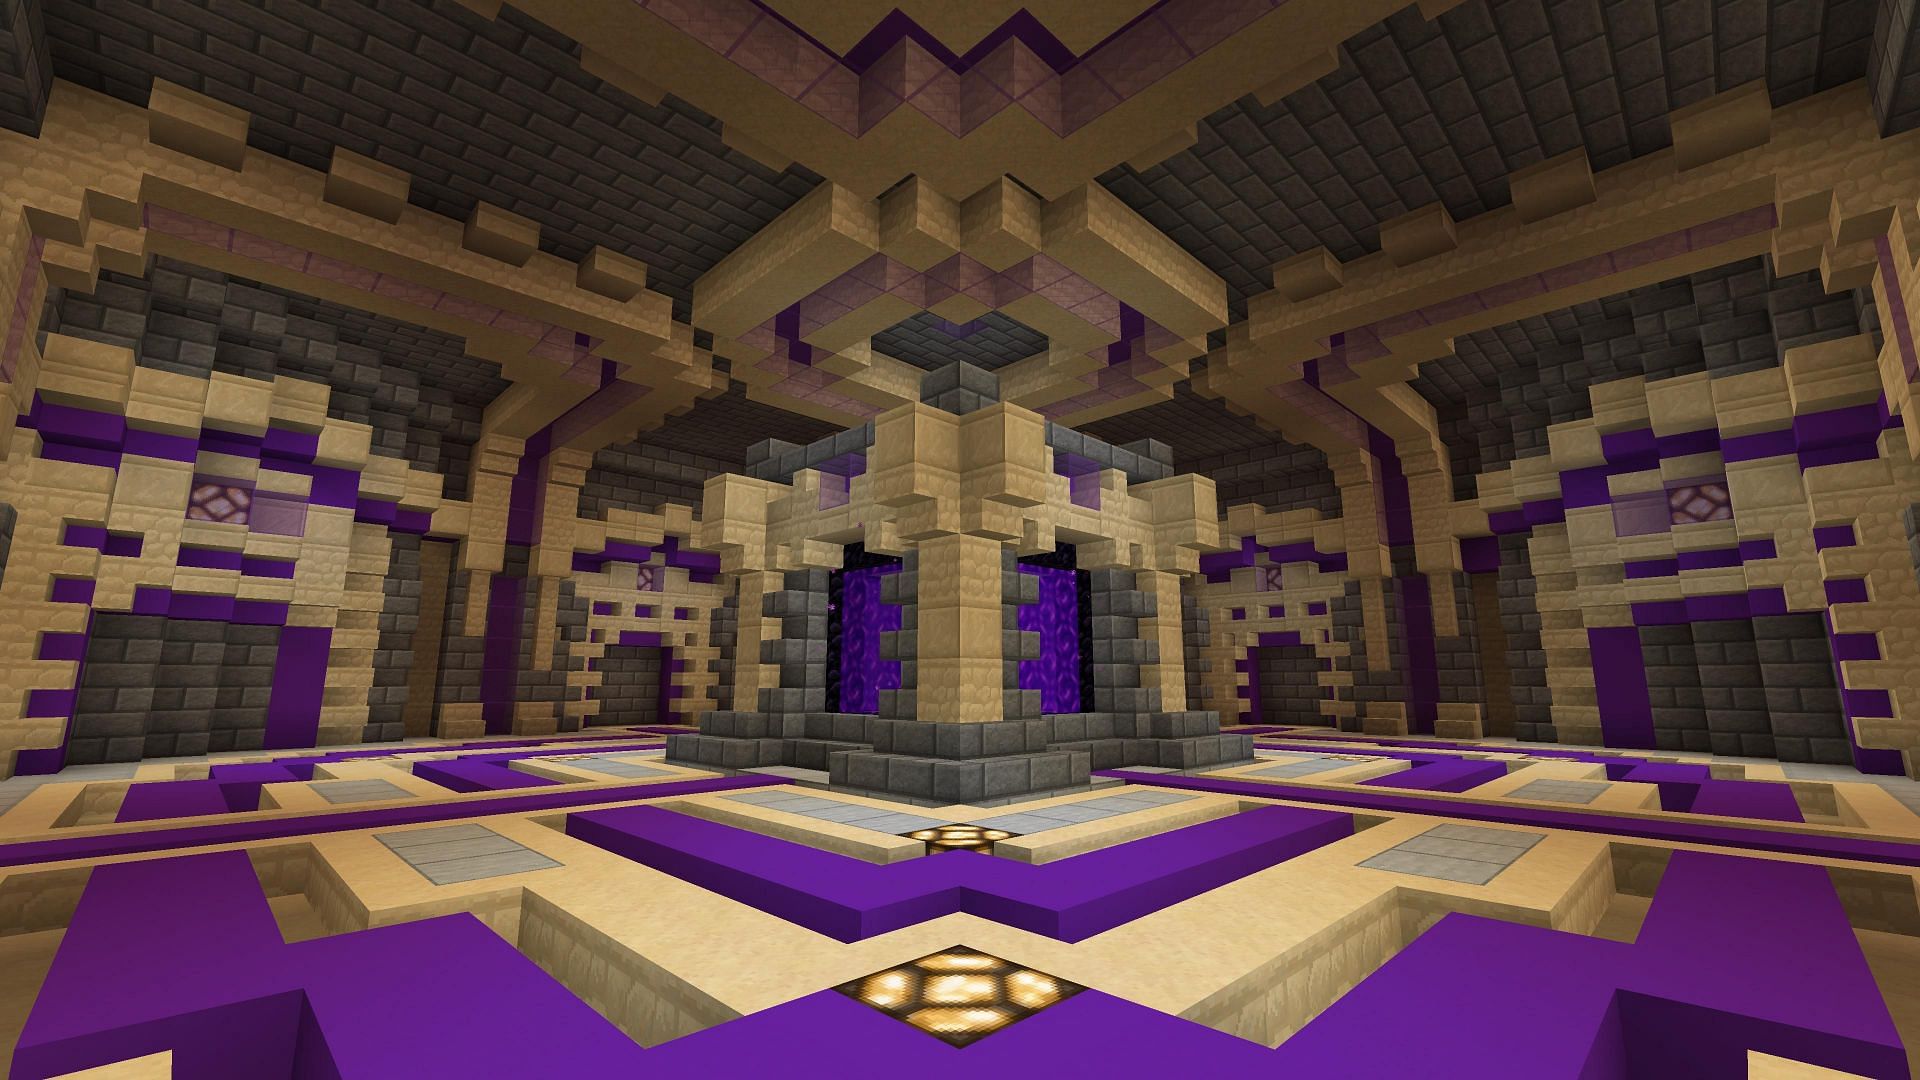 An example of a decorated Minecraft Nether hub (Image via Reddit)